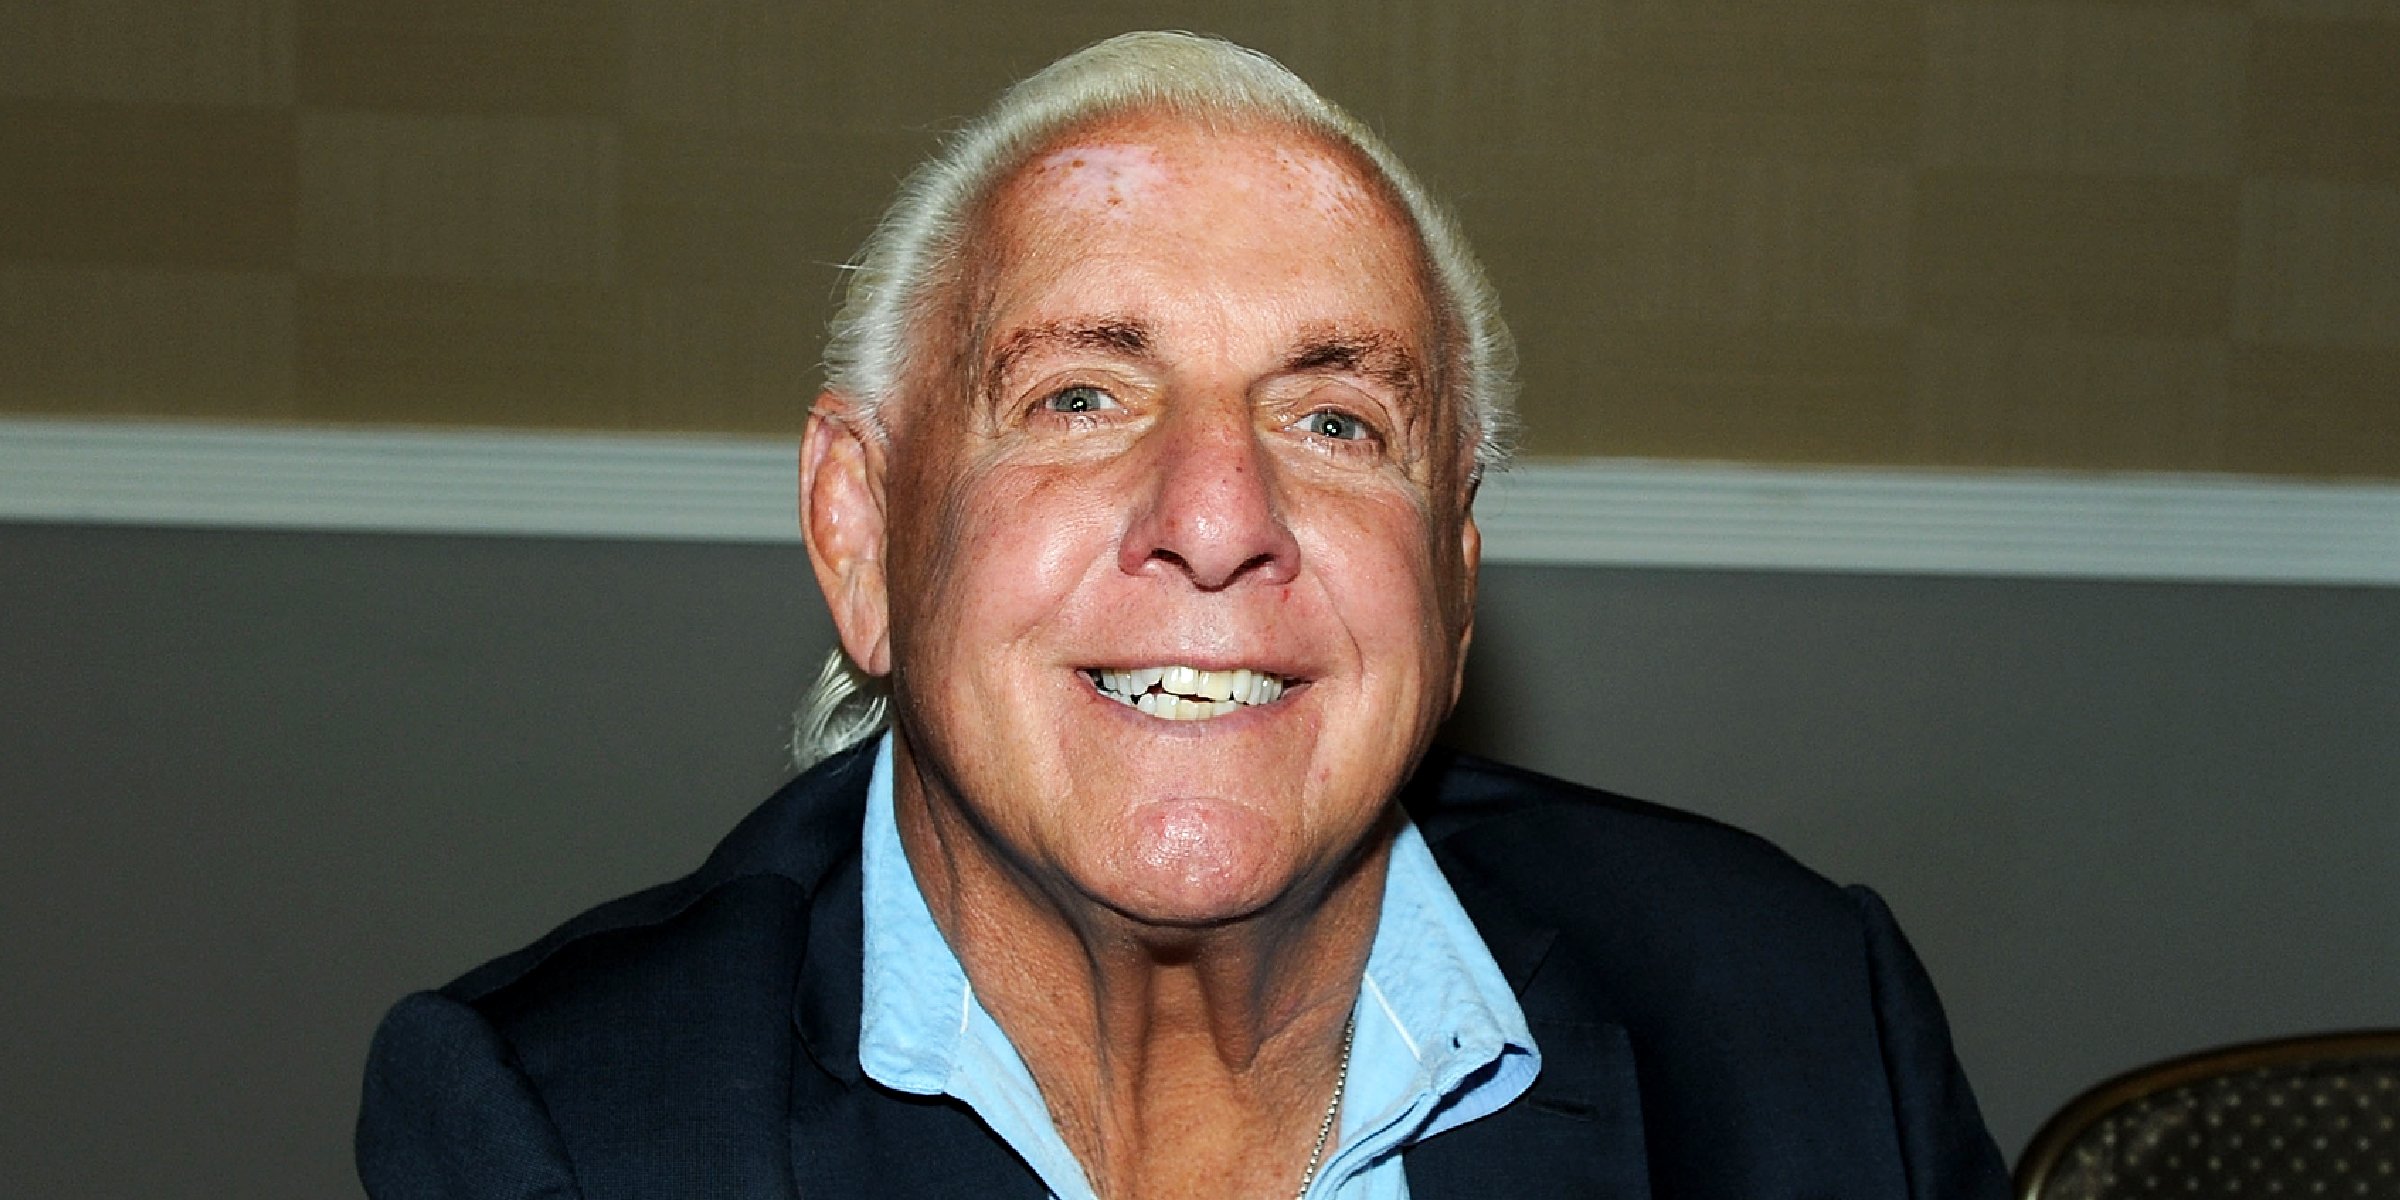 Ric Flair | Source: Getty Images